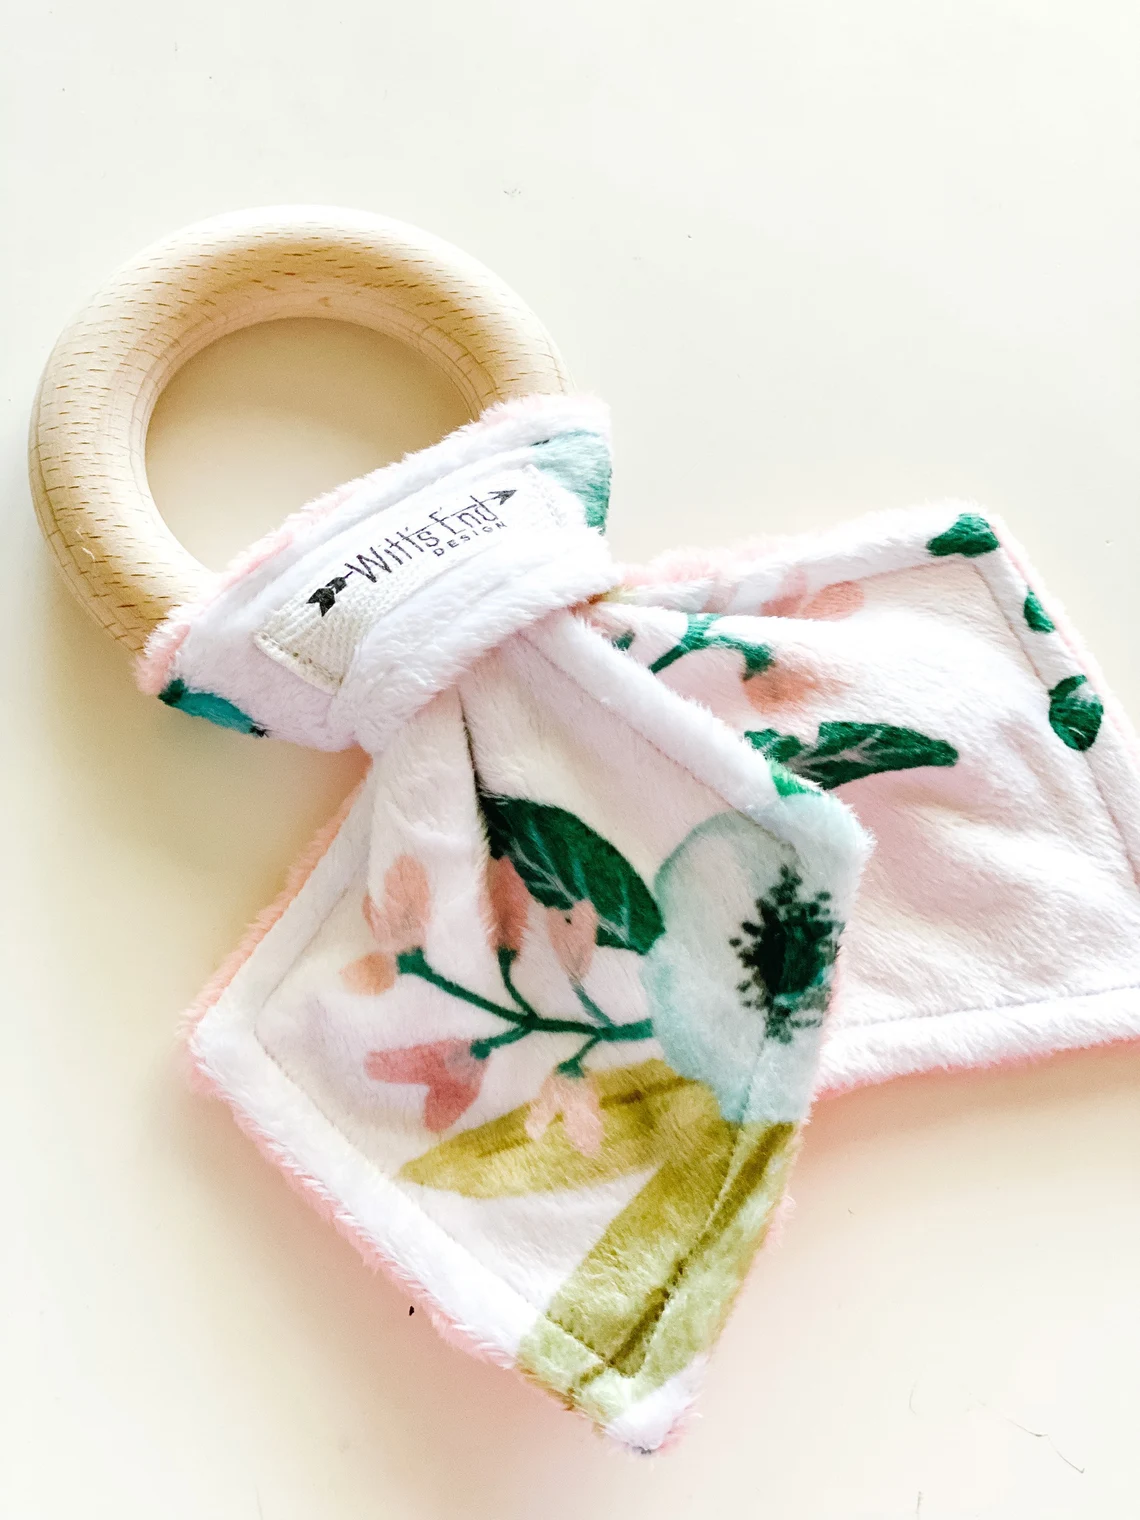 30 baby shower gifts under $30 – House Mix